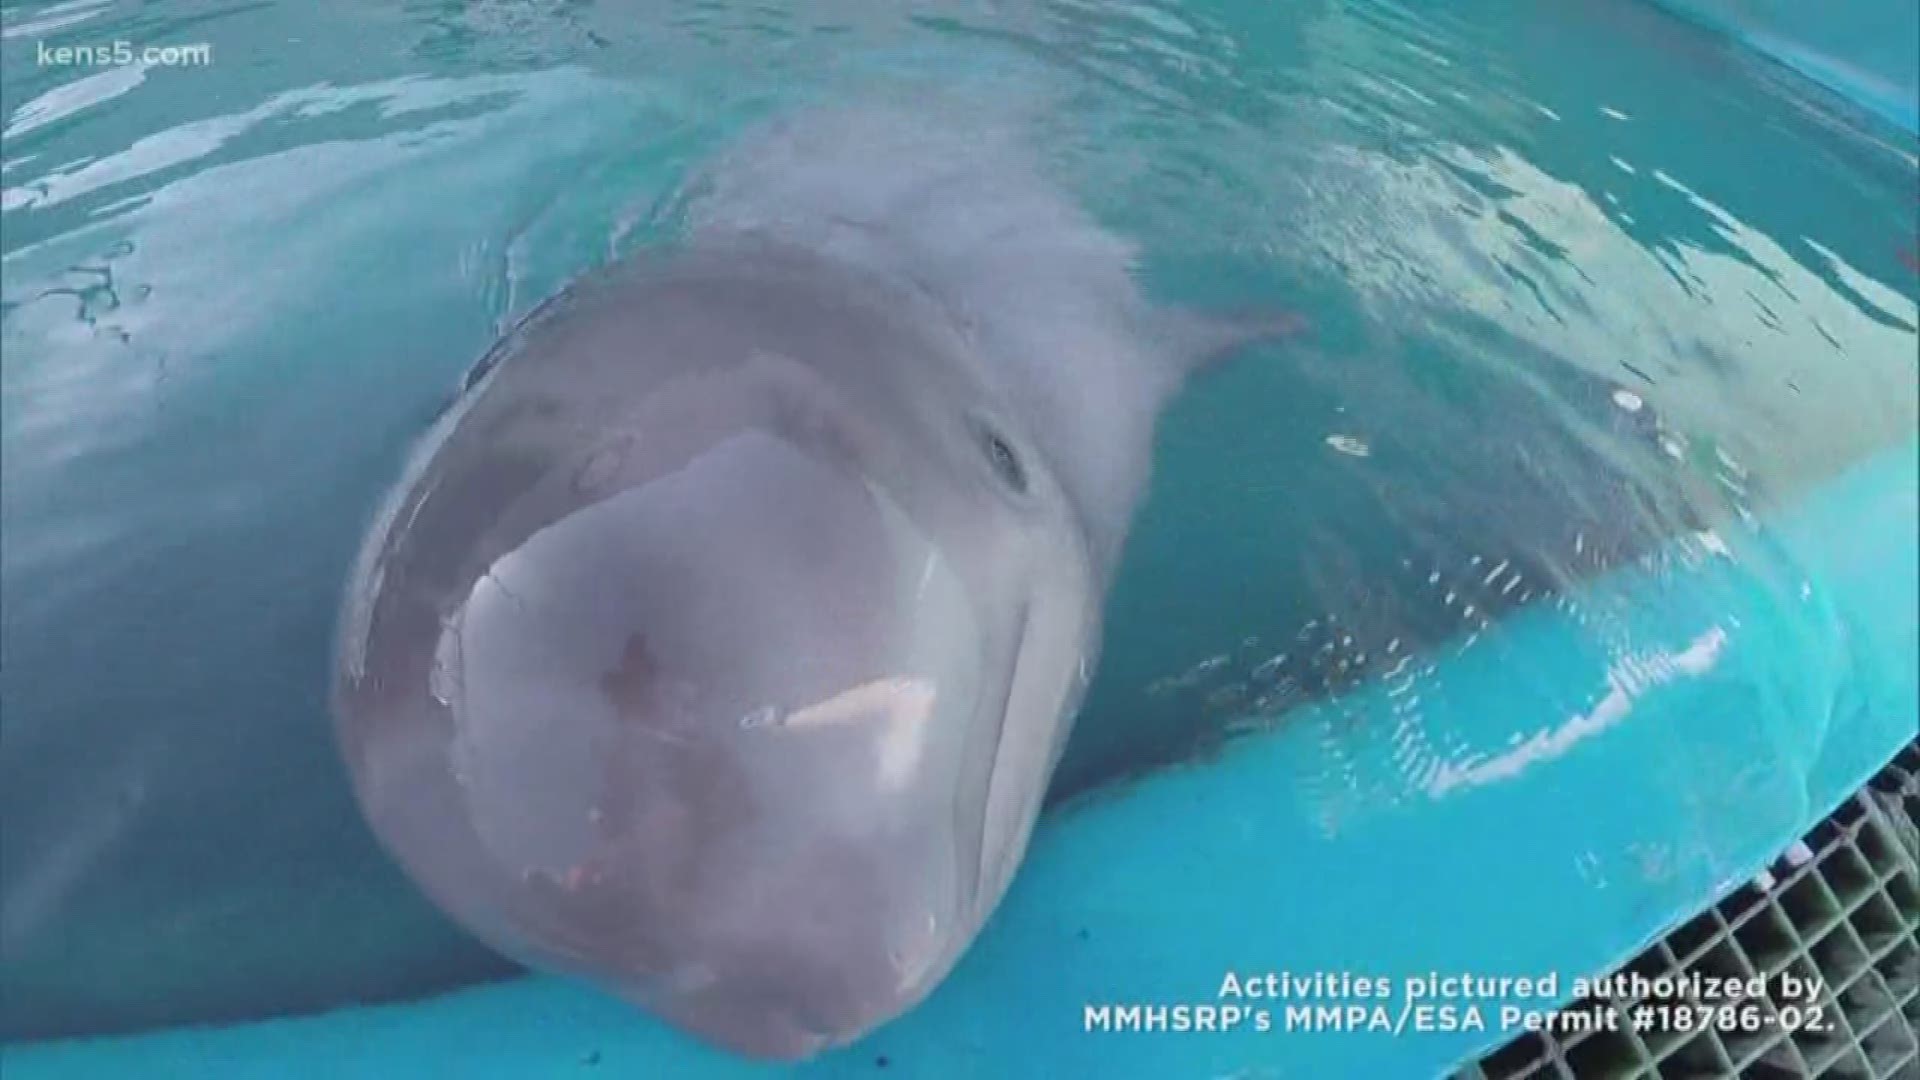 A beluga calf that was found abandoned in Alaska and brought to SeaWorld San Antonio is sick and is being treated.